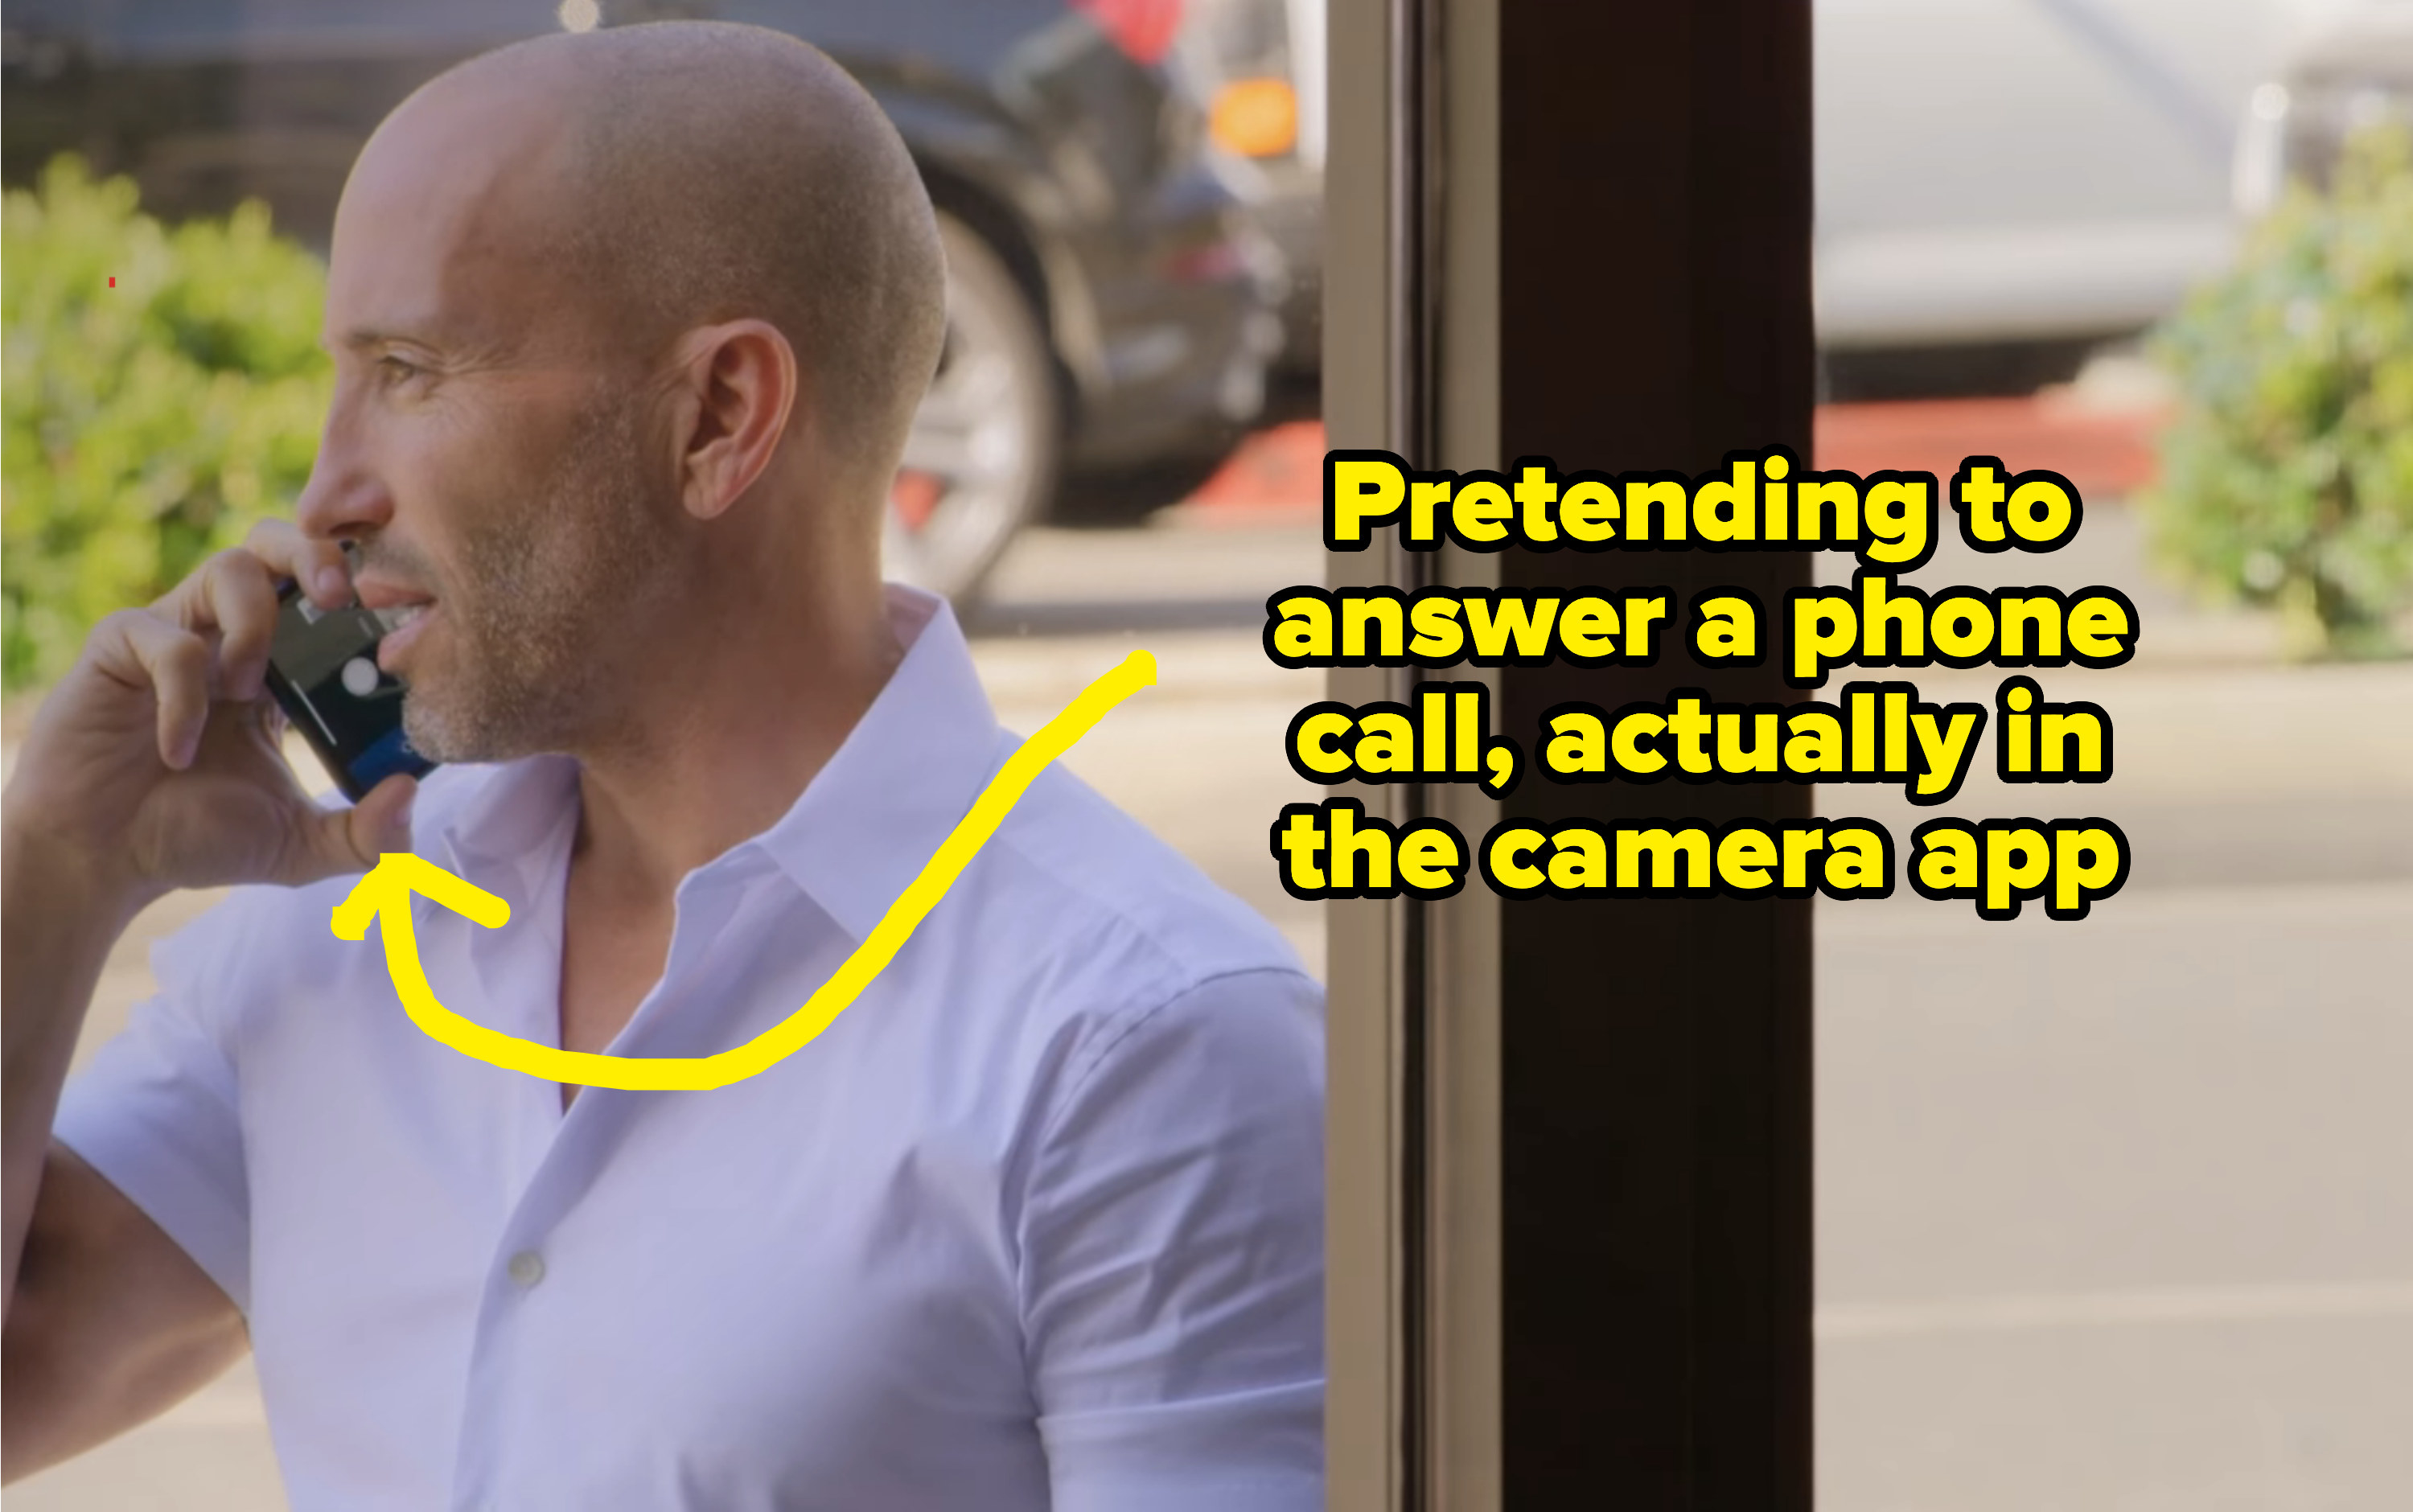 Jason from Selling Sunset &quot;answering a phone call&quot; while on his camera app